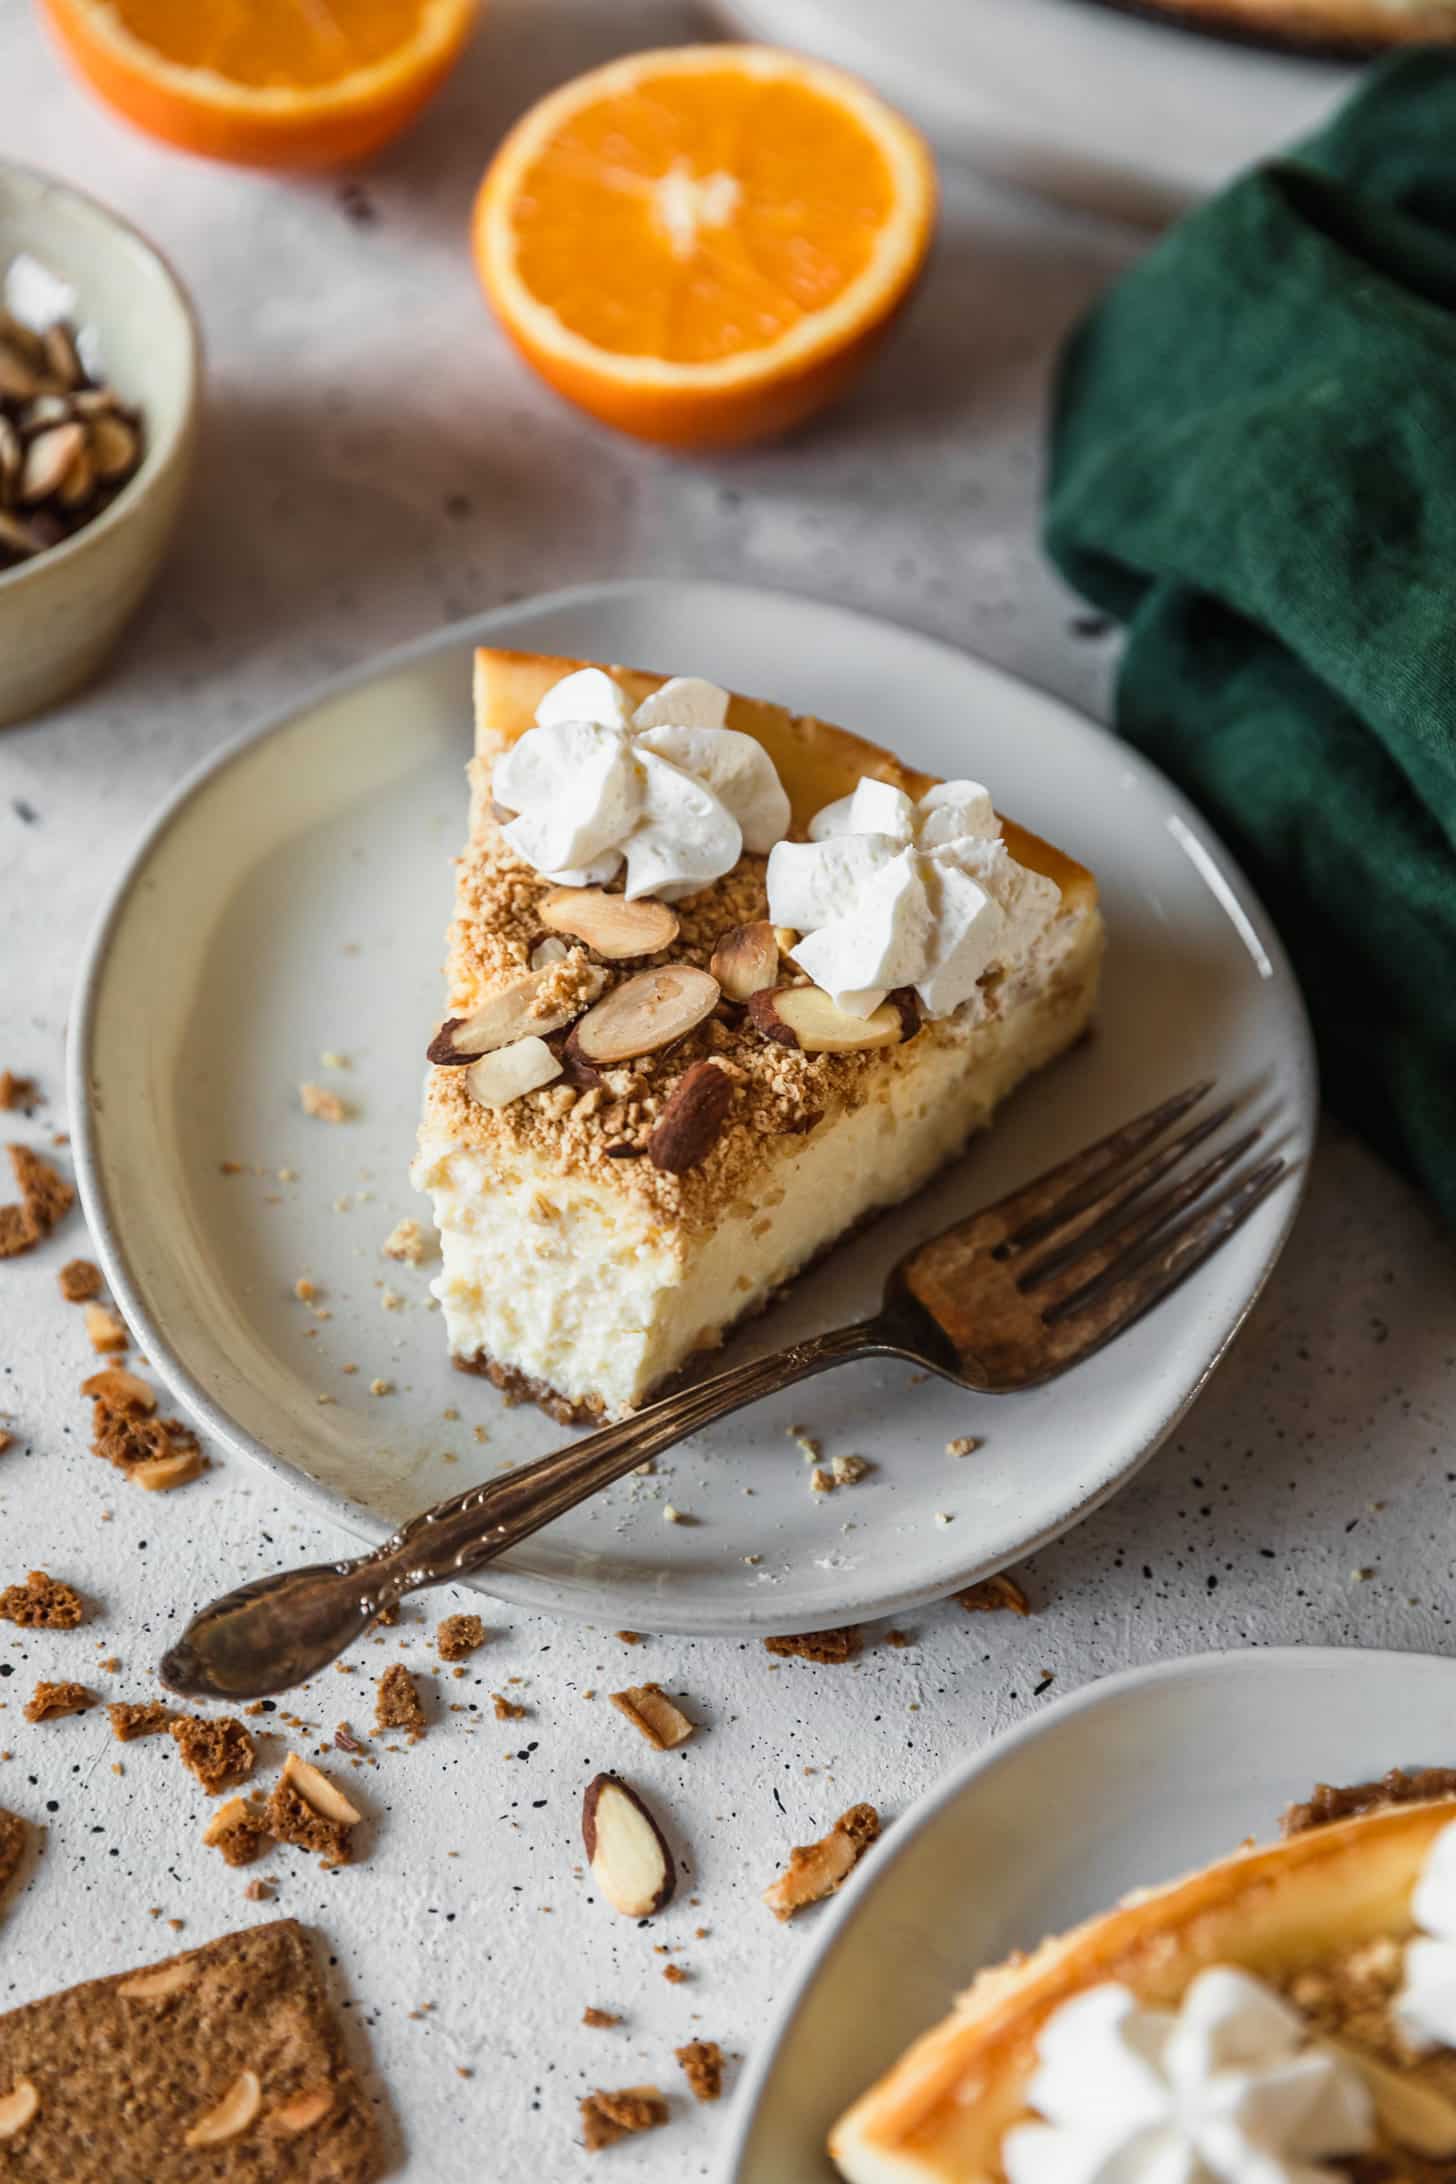 A slice of mascarpone cheesecake with a bite taken out of it on a white counter next to an emerald green napkin, sliced orange, and white bowl of almonds.